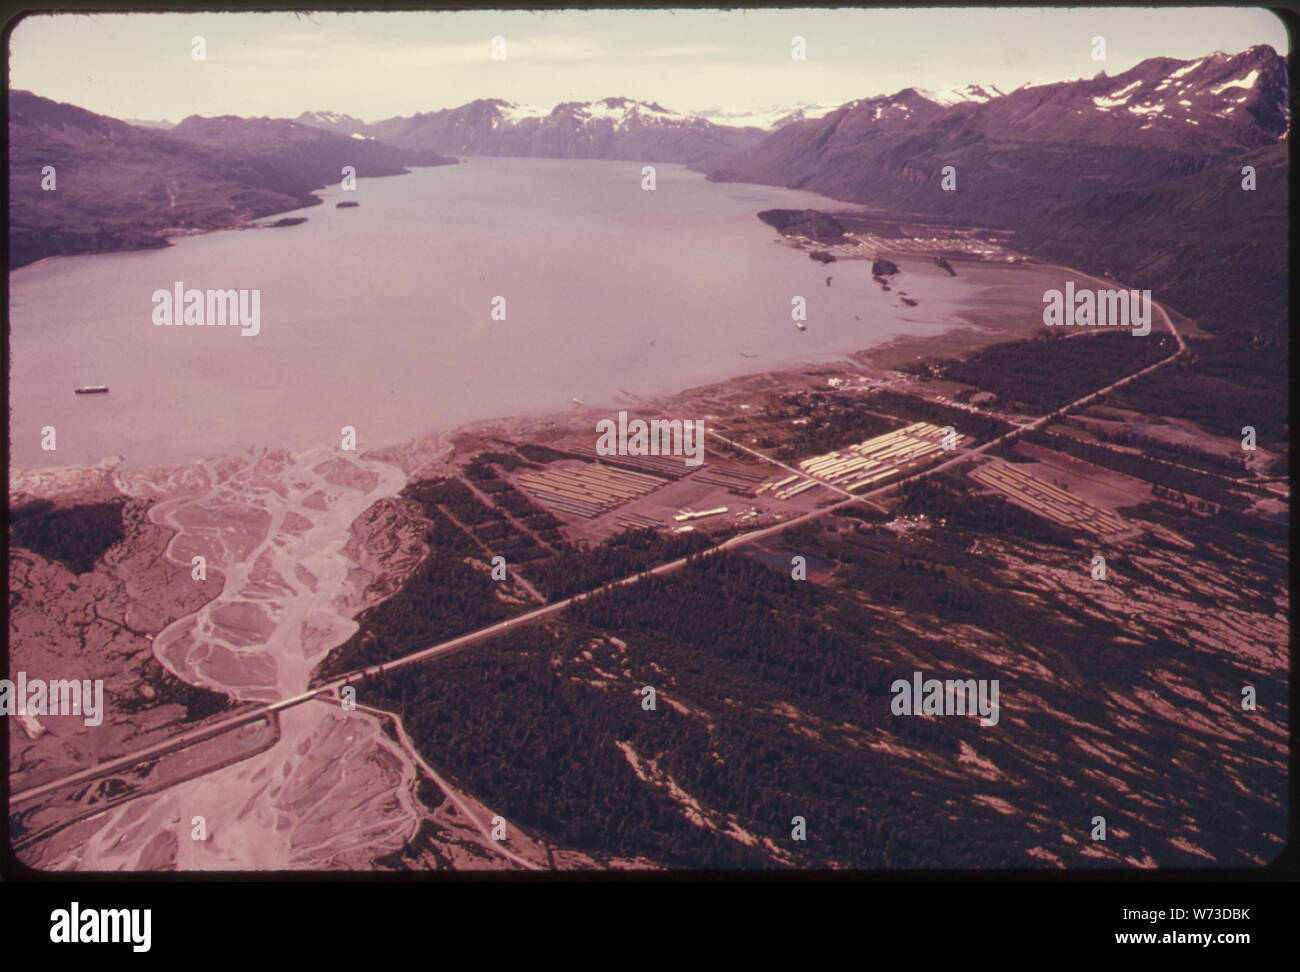 VIEW WEST ALONG PORT VALDEZ. TERMINAL SITE VISIBLE ON HILLSIDE AT CENTER LEFT ABOVE PENINSULA (JACKSON POINT) AND SMALL ISLET (SAW ISLAND). CITY OF VALDEZ (1970 POPULATION 1,000; 1974 POPULATION 2,000) APPEARS AT CENTER RIGHT SOME 418 MILES OF 48-INCH DIAMETER PIPE ARE STORED IN YARDS IN THE LOWER CENTER FOREGROUND. THE RICHARDSON HIGHWAY ARCS ACROSS THE LOWER FOREGROUND TO SWING AROUND THE NORTHEAST END OF PORT VALDEZ TO REACH THE NEW TOWNSITE. MILE 788-789 ALASKA PIPELINE ROUTE Stock Photo